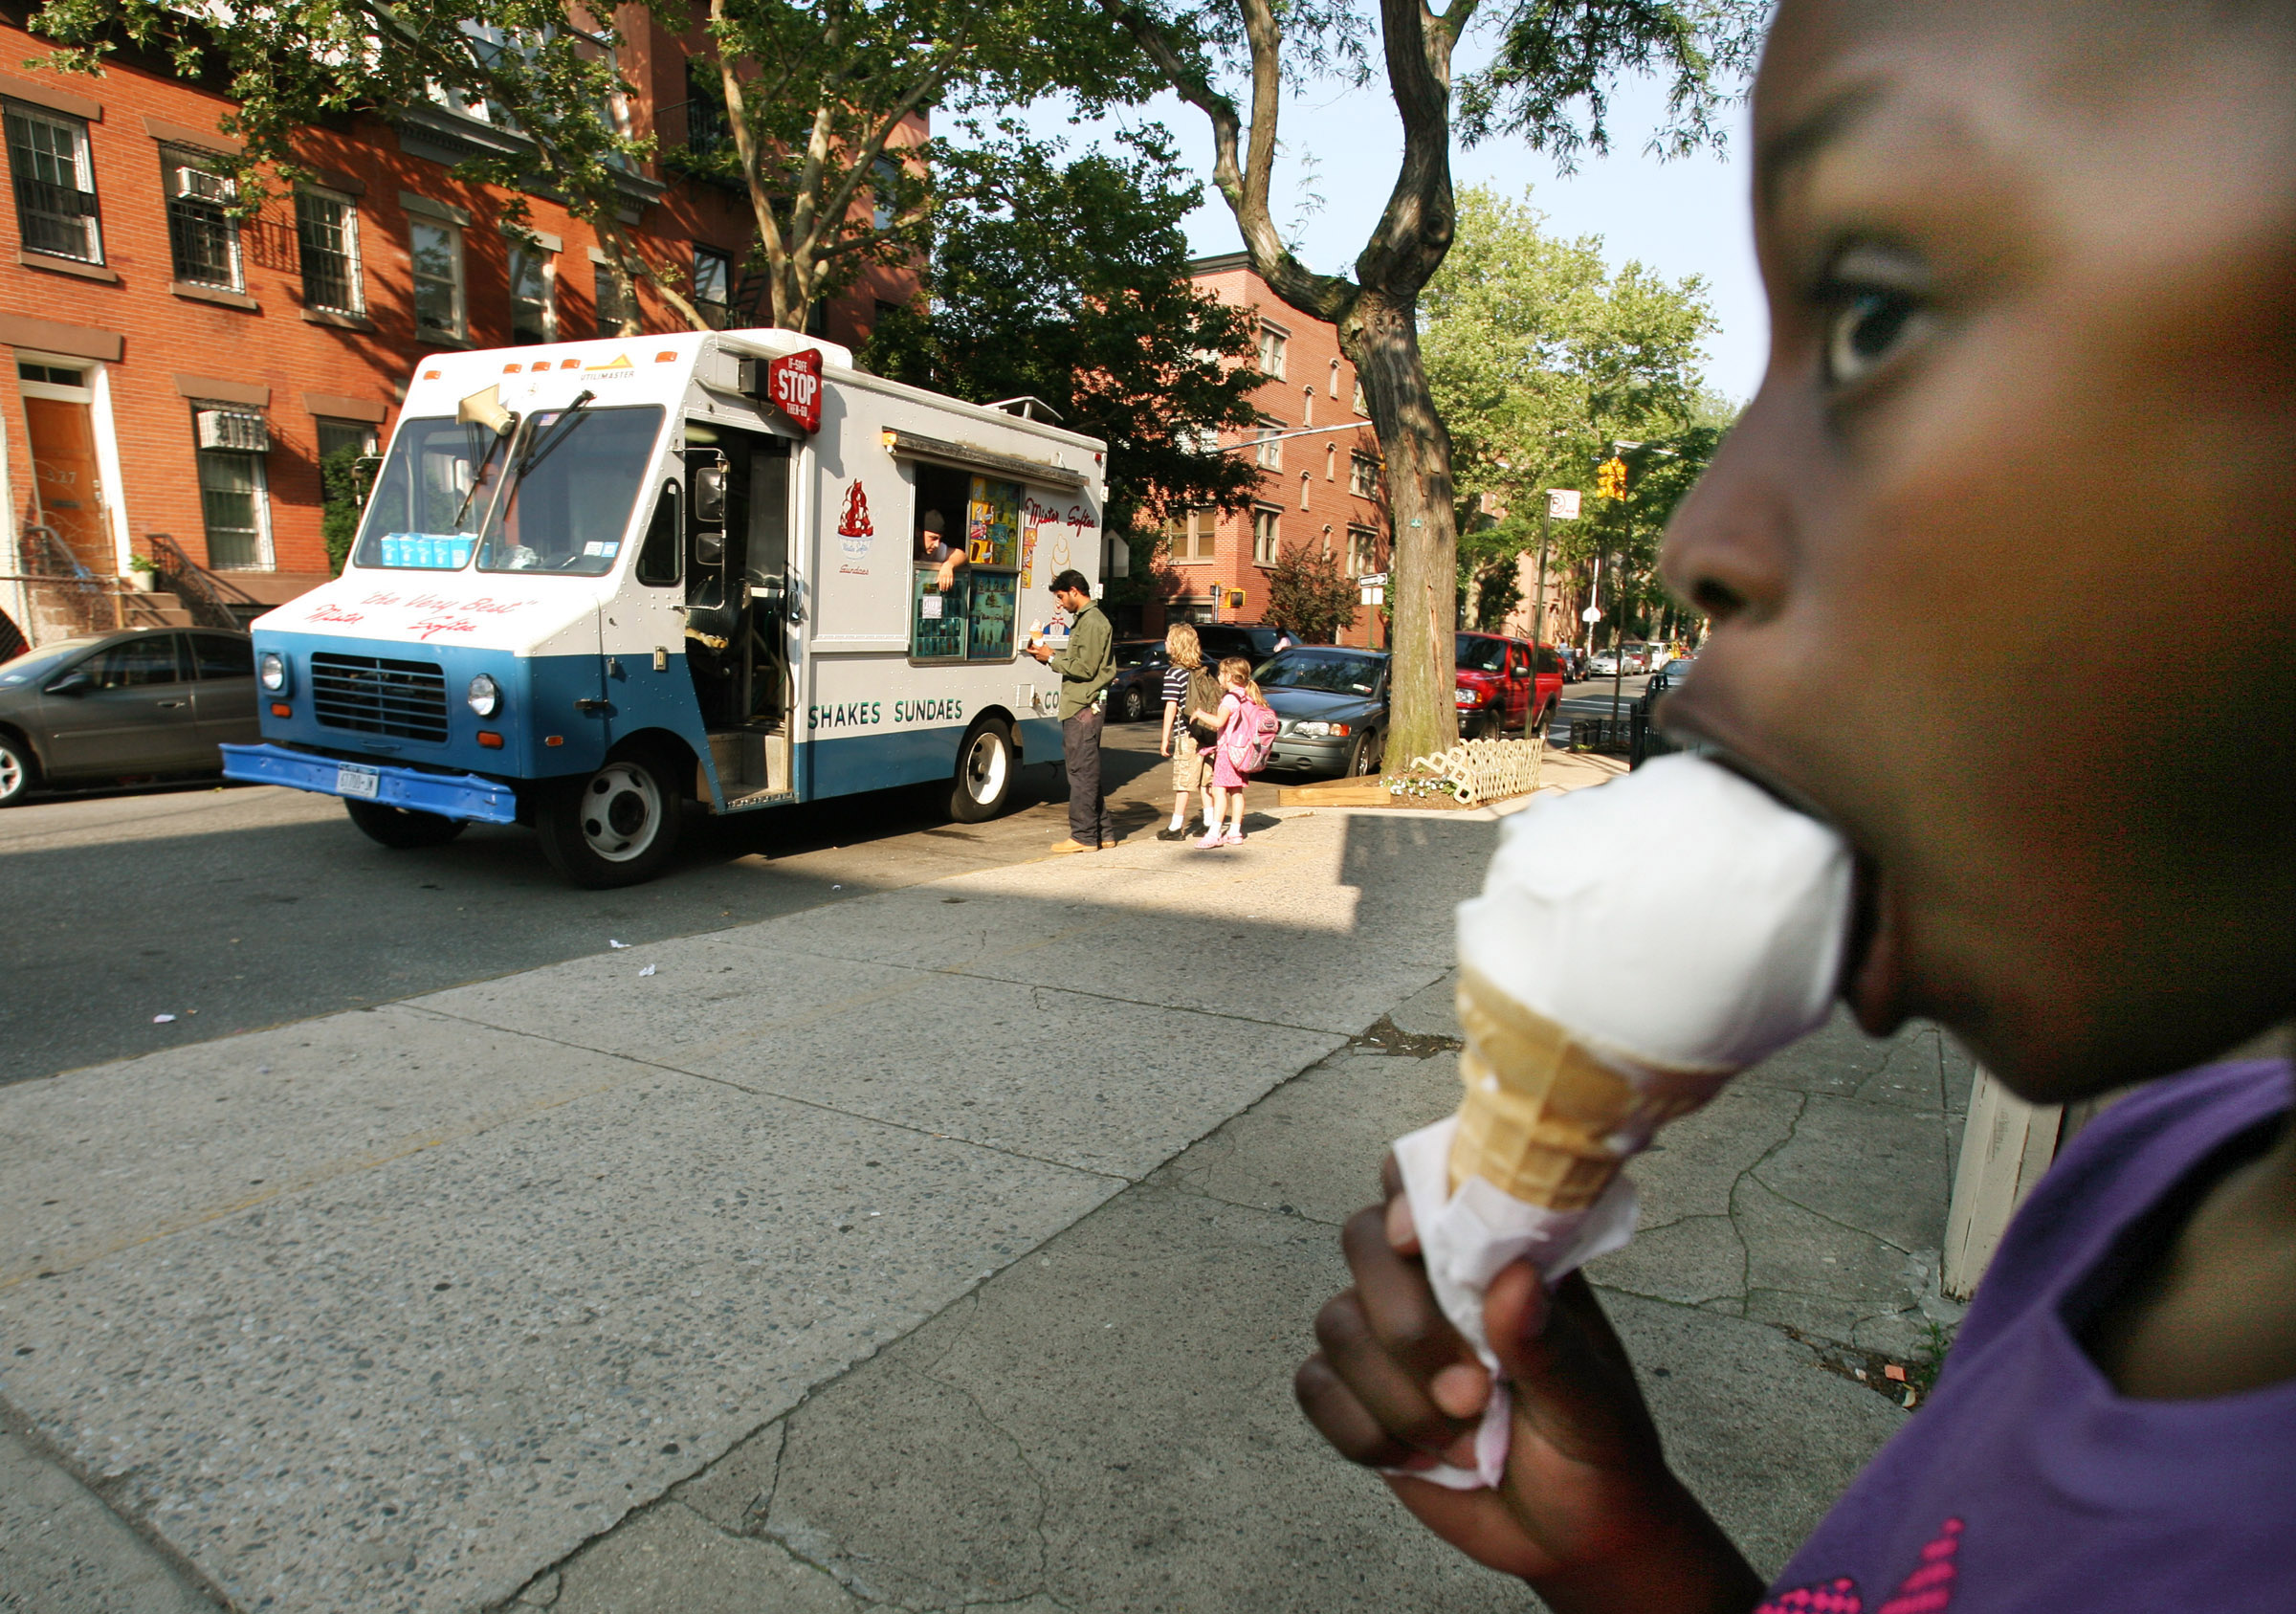 PHOTO: A Mister Softee ice cream truck makes its way through the streets of  Brooklyn, New York, June 18, 2007.